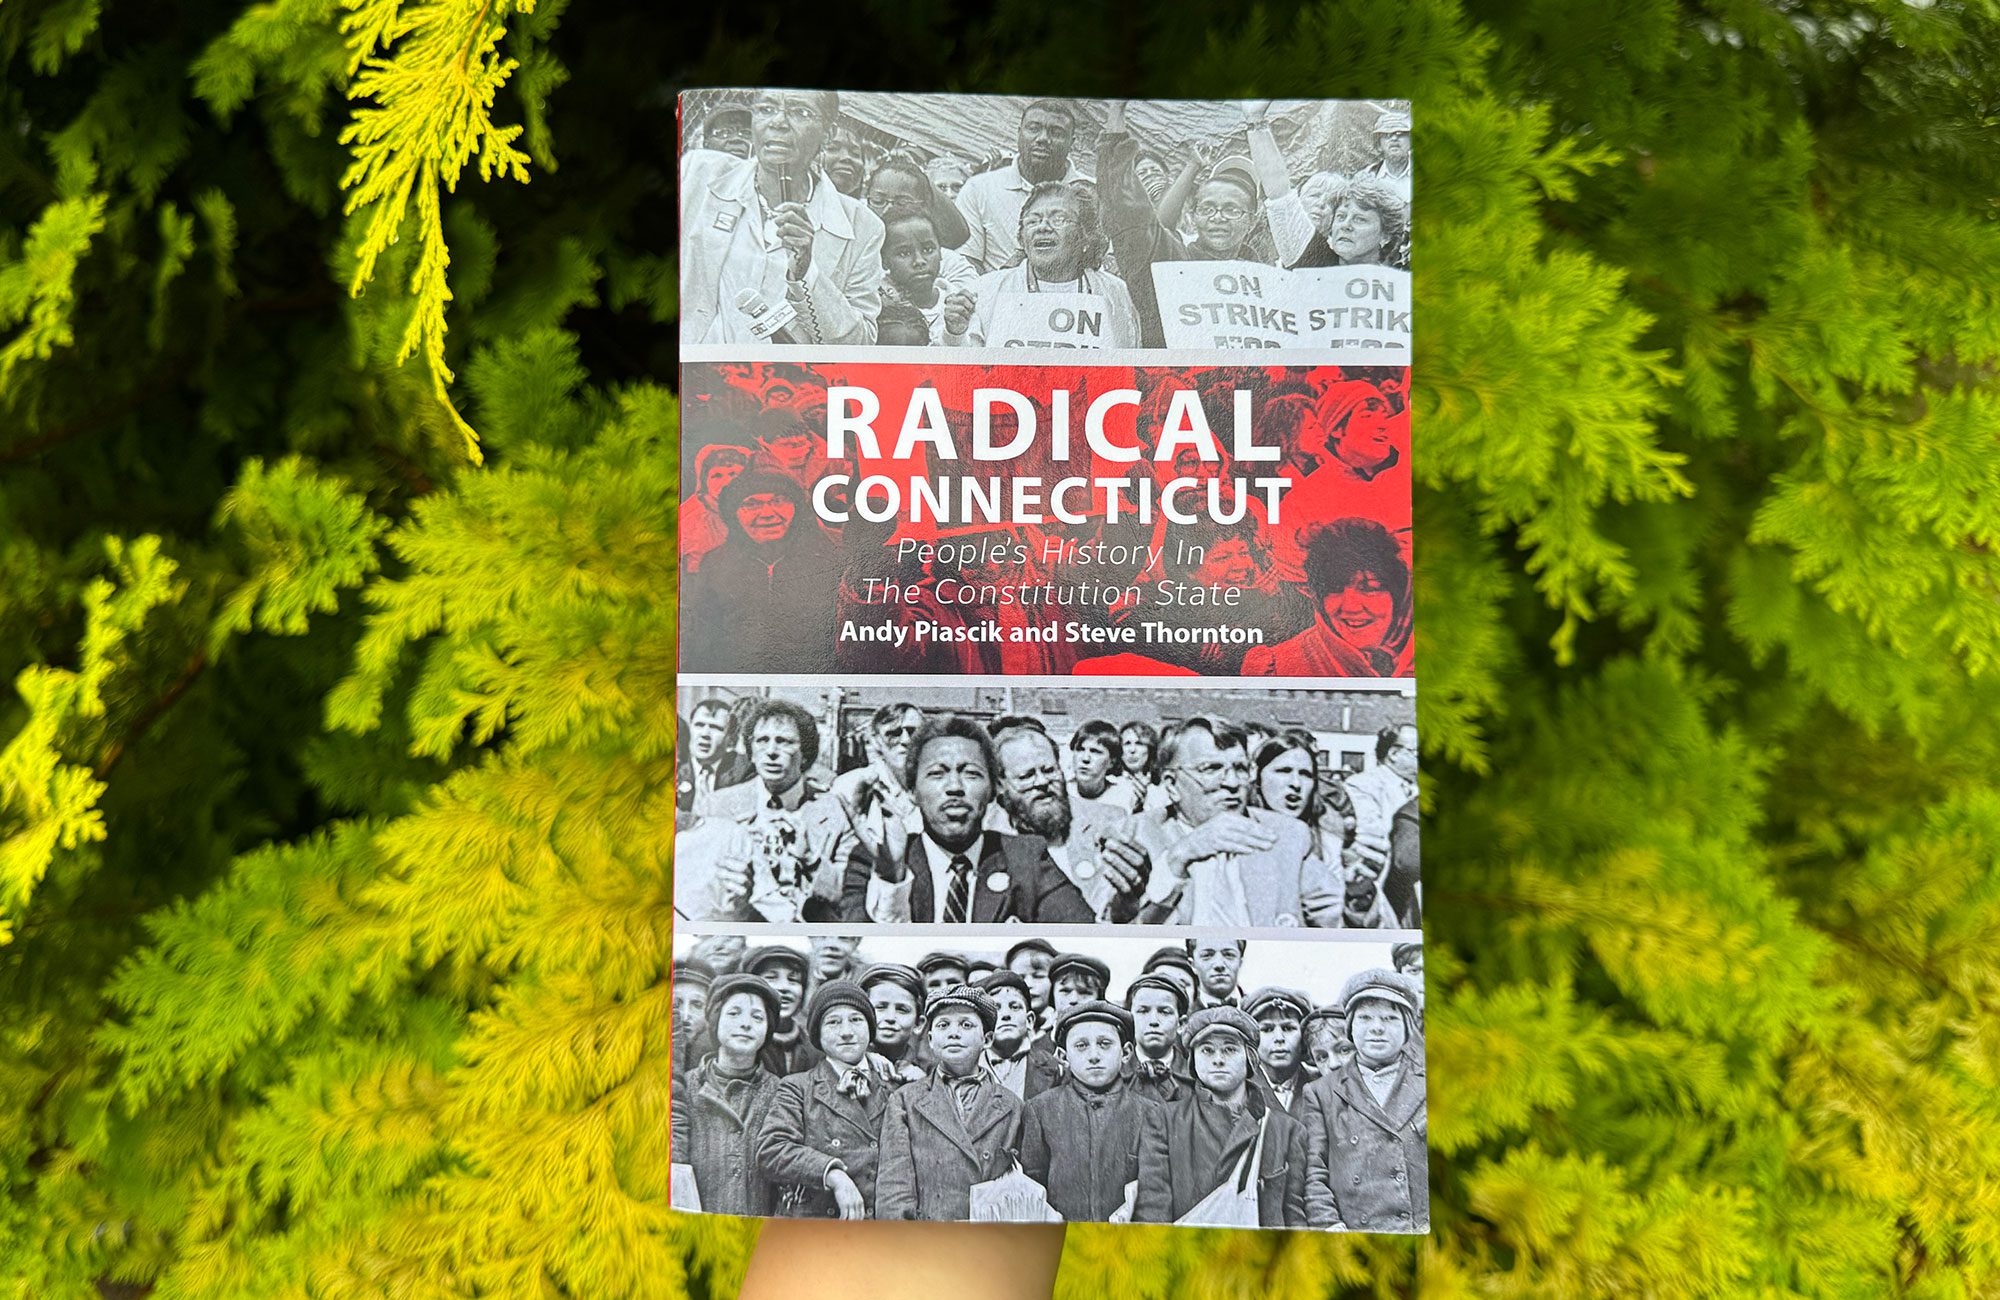 Must-read history book: “Radical Connecticut” – We-Ha